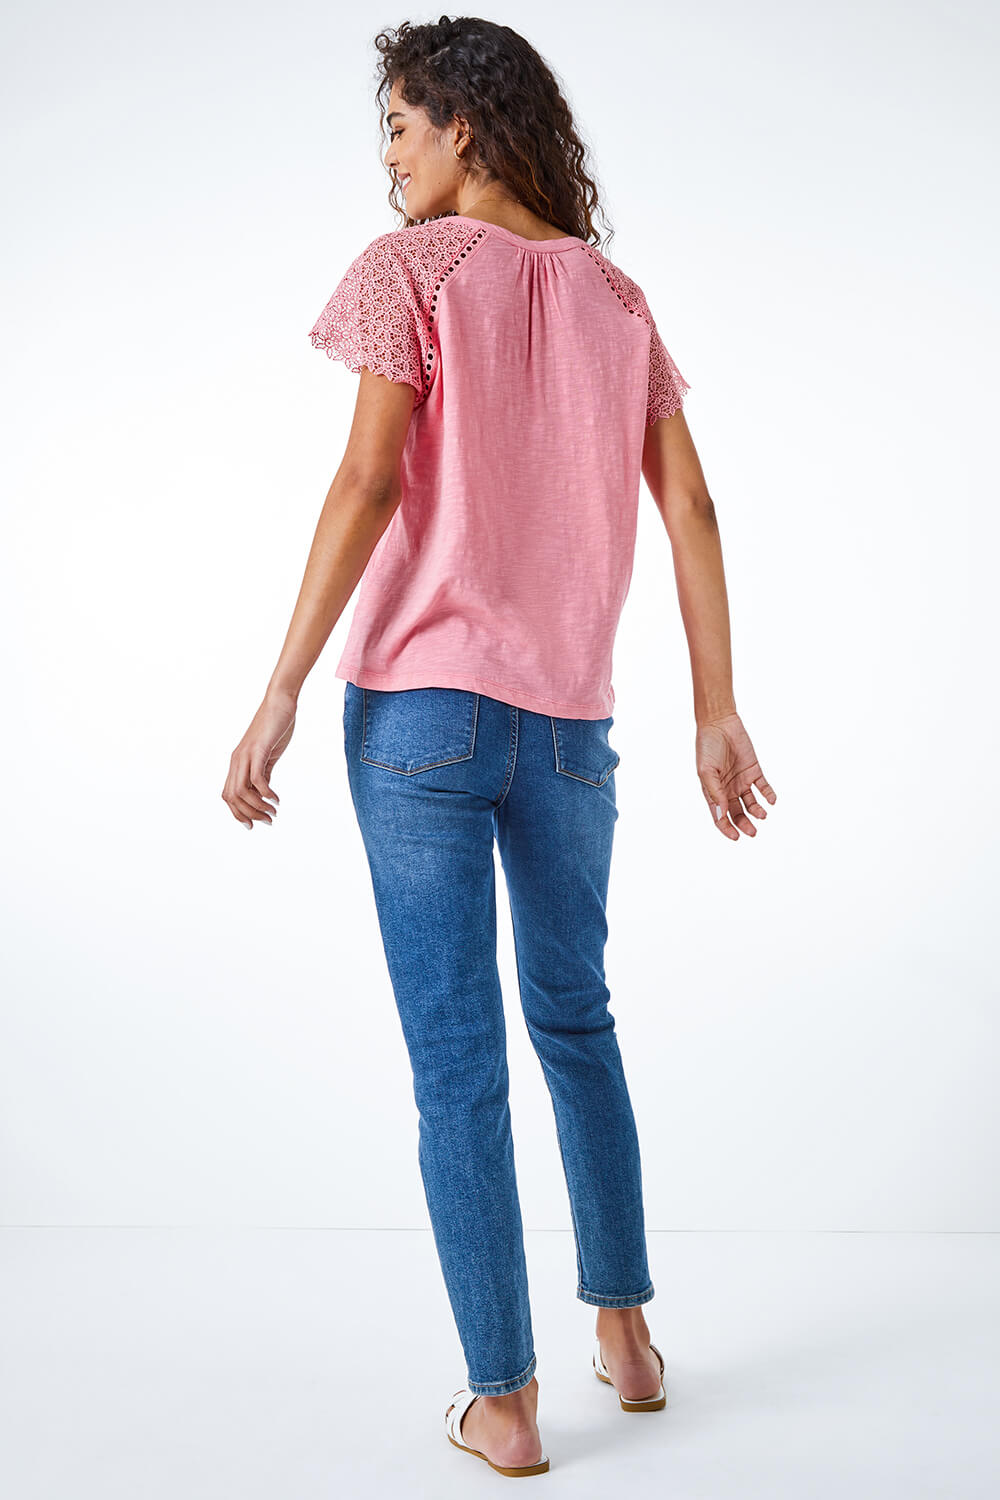 PINK Embroidered Sleeve Jersey T-Shirt, Image 3 of 5